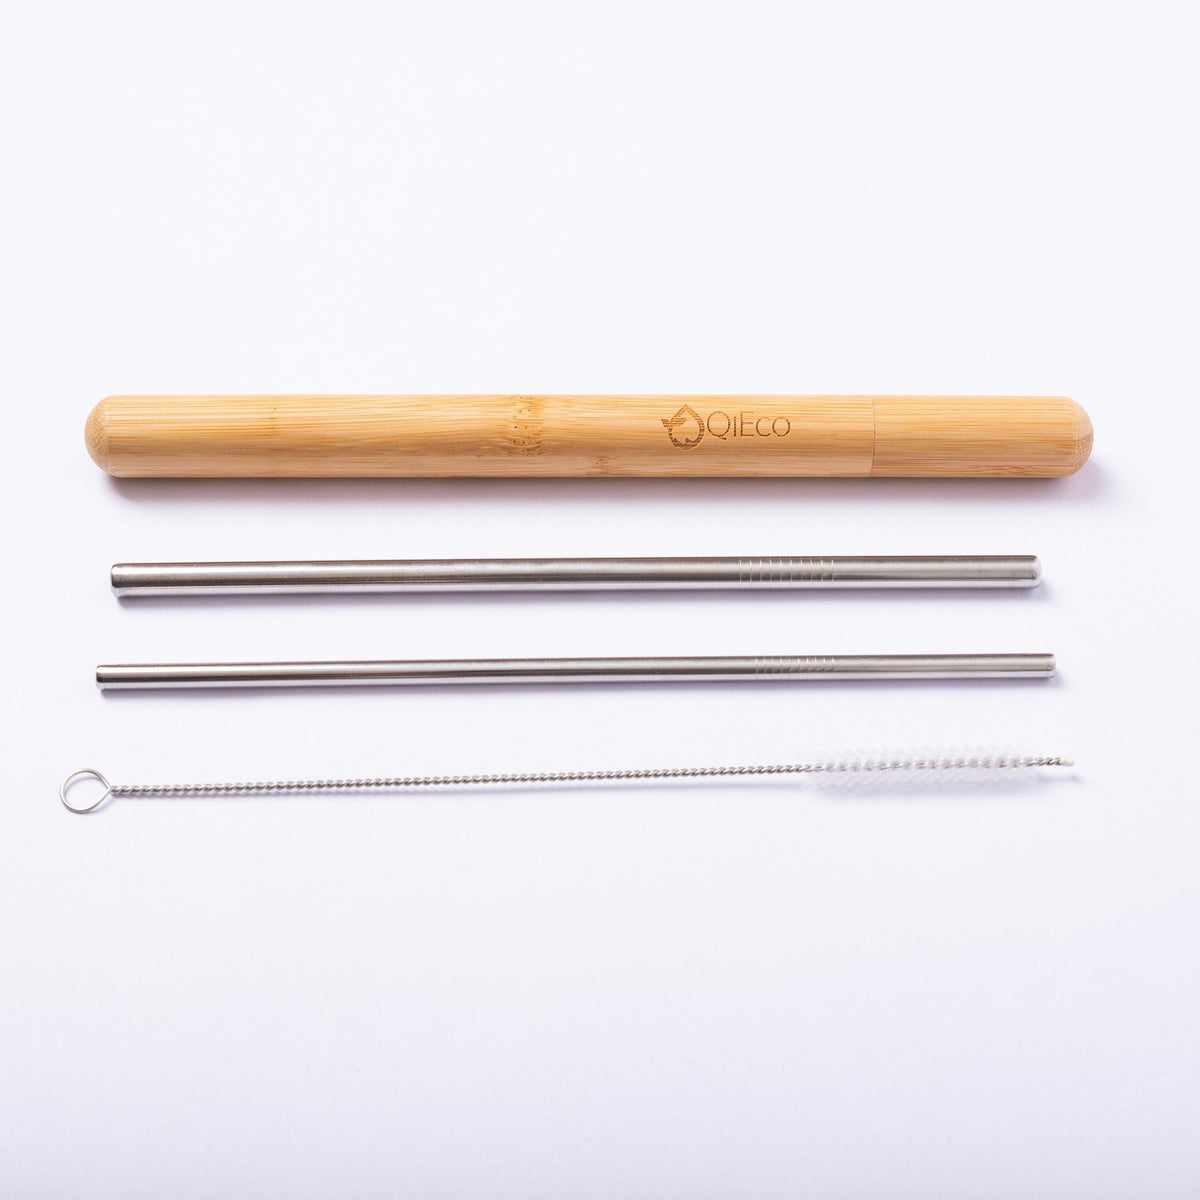 Reusable Stainless Steel Drinking Straw with Bamboo Case Holder Travel 